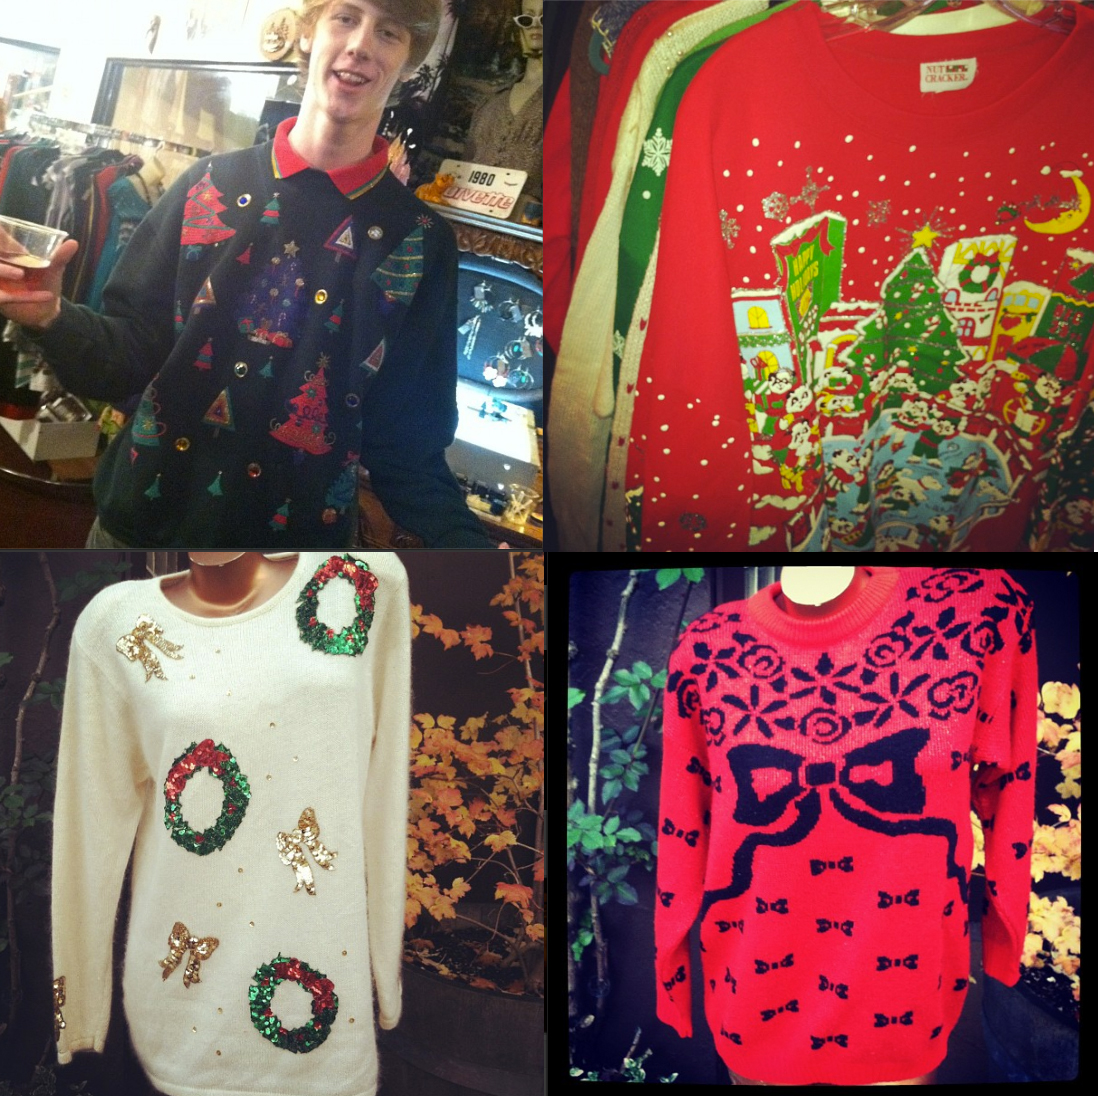 christmas ugliness in store now!